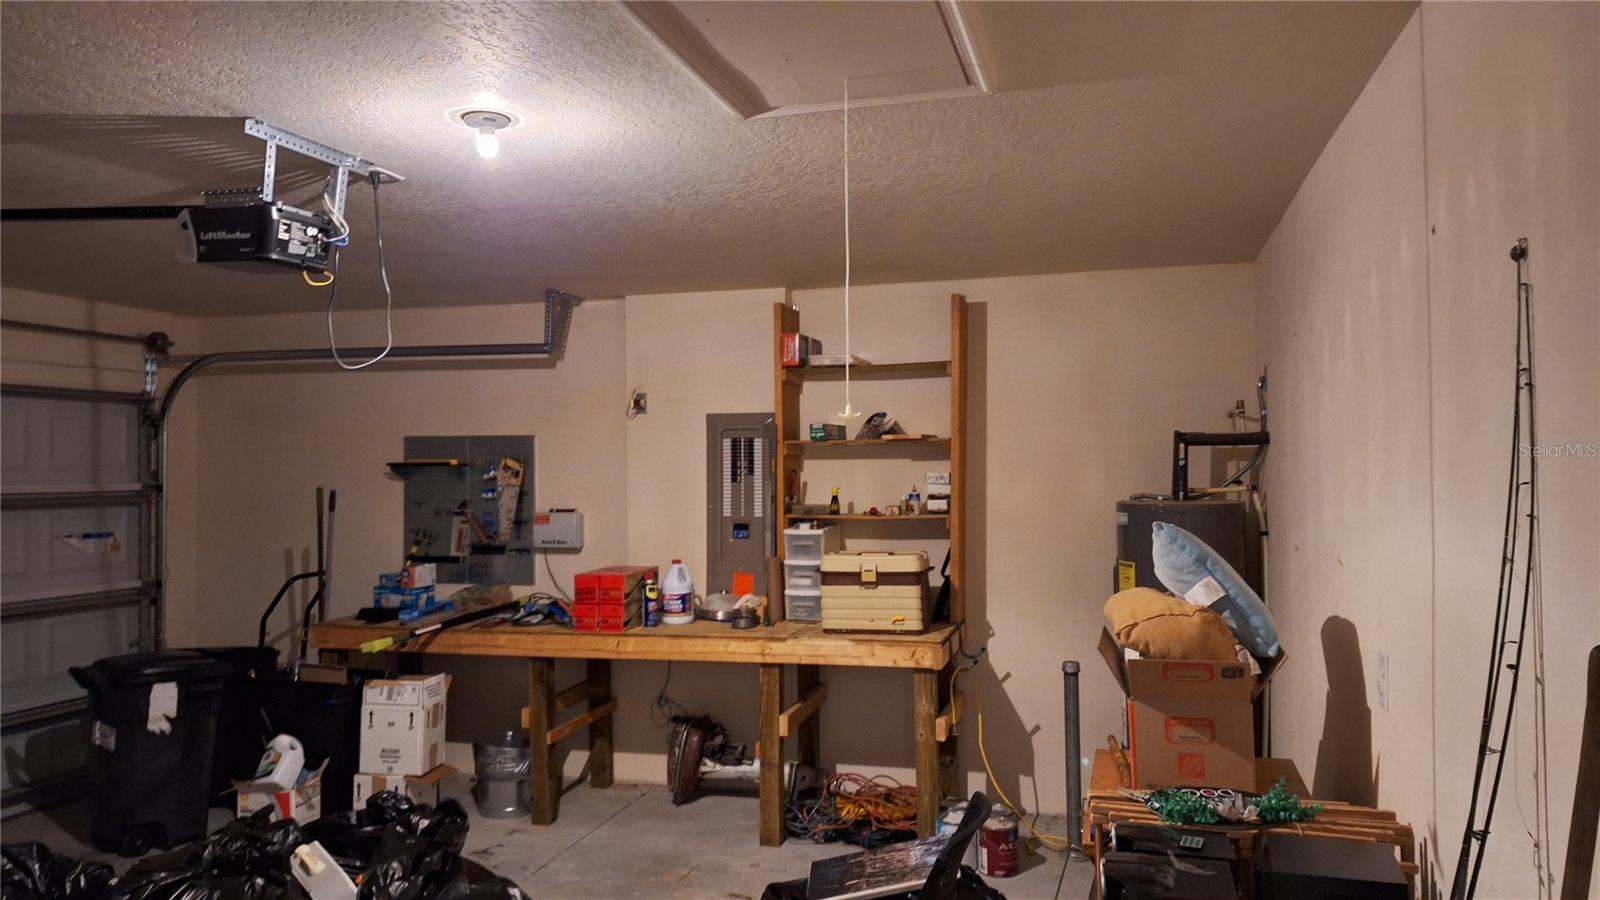 Work bench and pull down Attic steps